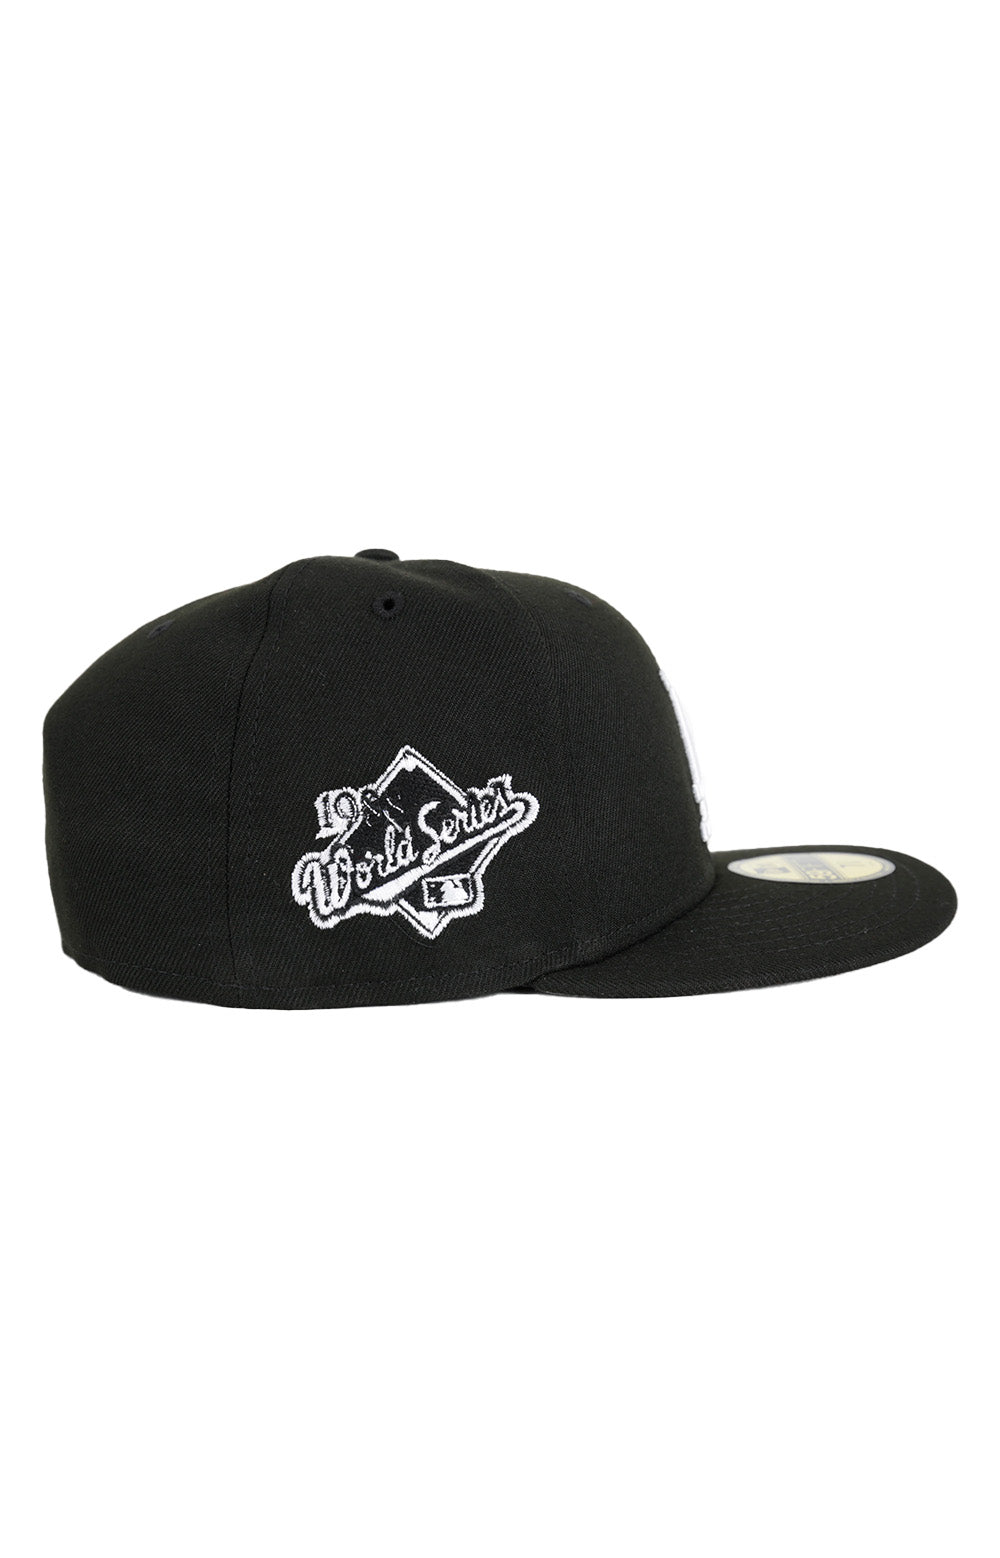 LA Dodgers Black/White 88 World Series Side Patch 59FIFTY Fitted Hat